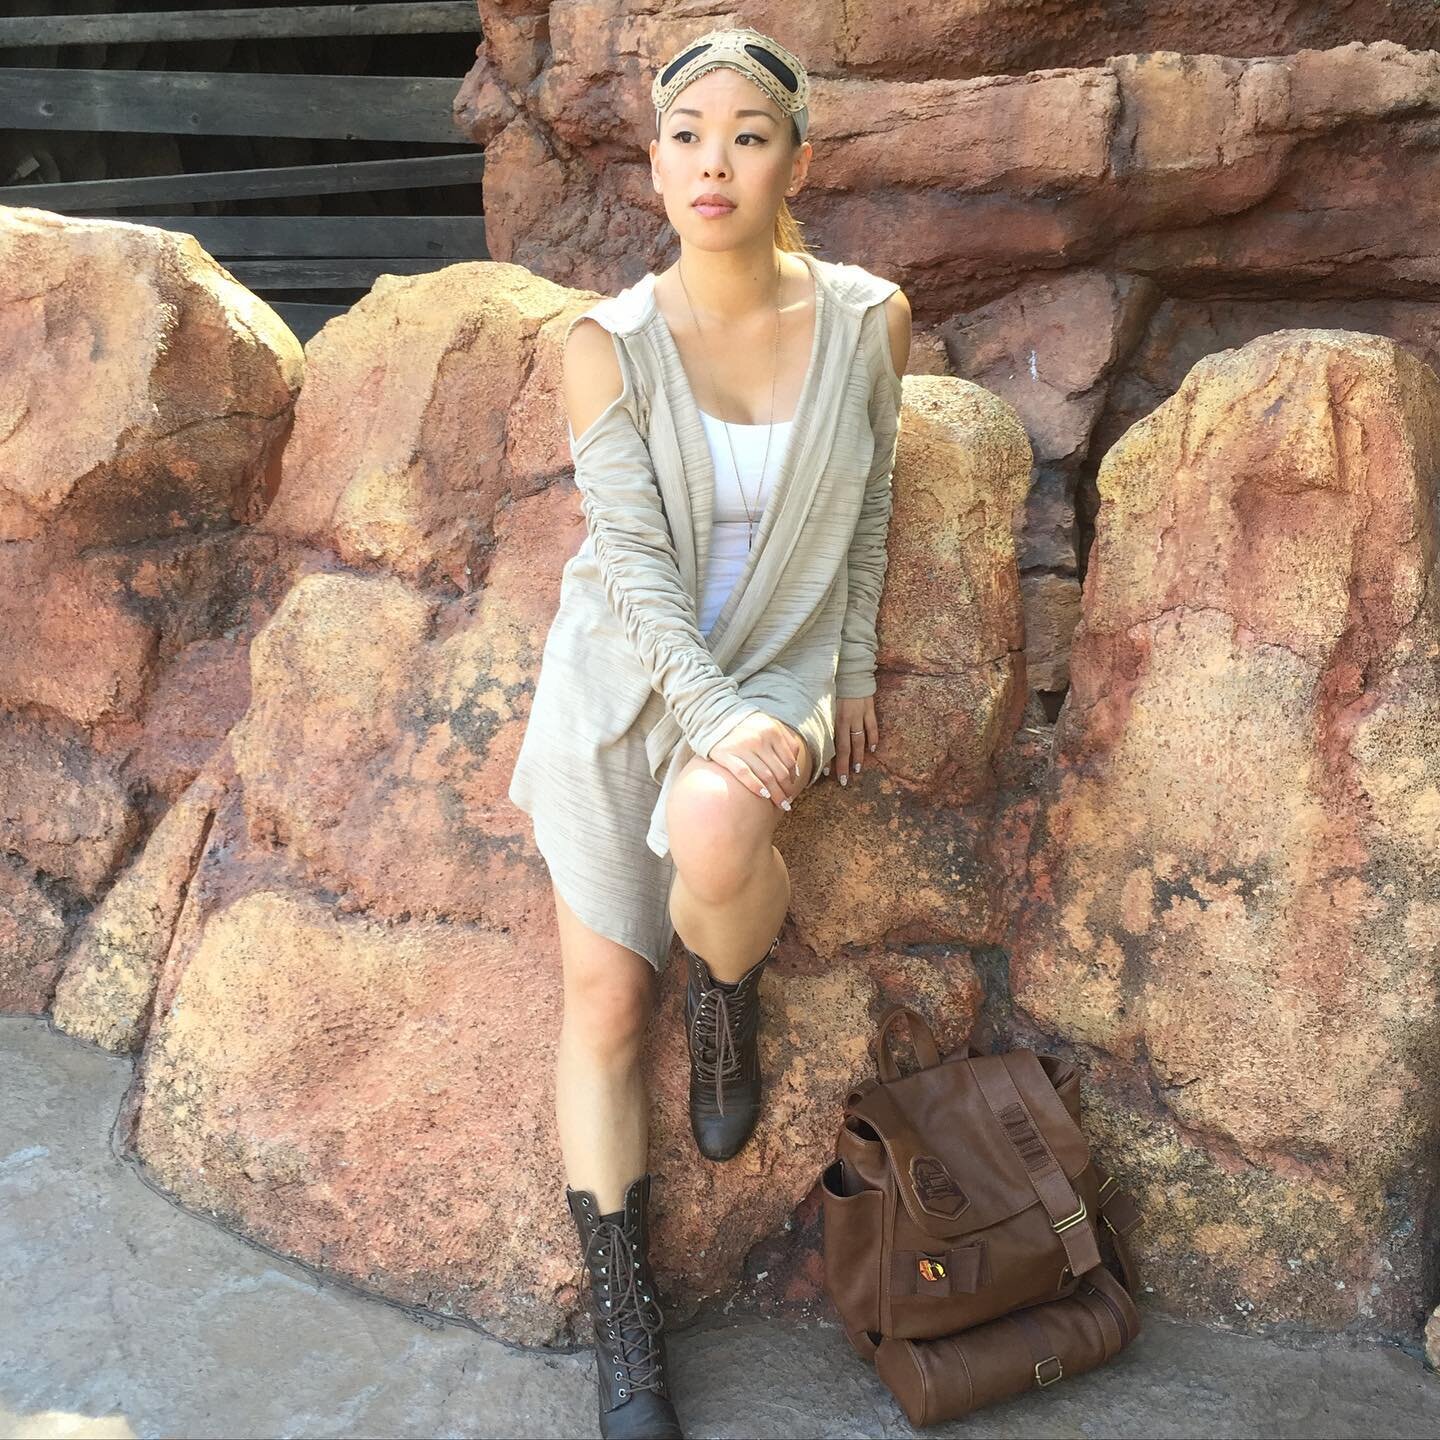 We&rsquo;re getting closer to this year&rsquo;s Her Universe Fashion Show and I can&rsquo;t wait to see all the designs. 
Throwing back to one of the first times I did a Disneybound with the Rey cardigan by @heruniverse. #starwars #rey #jedi #batuu #